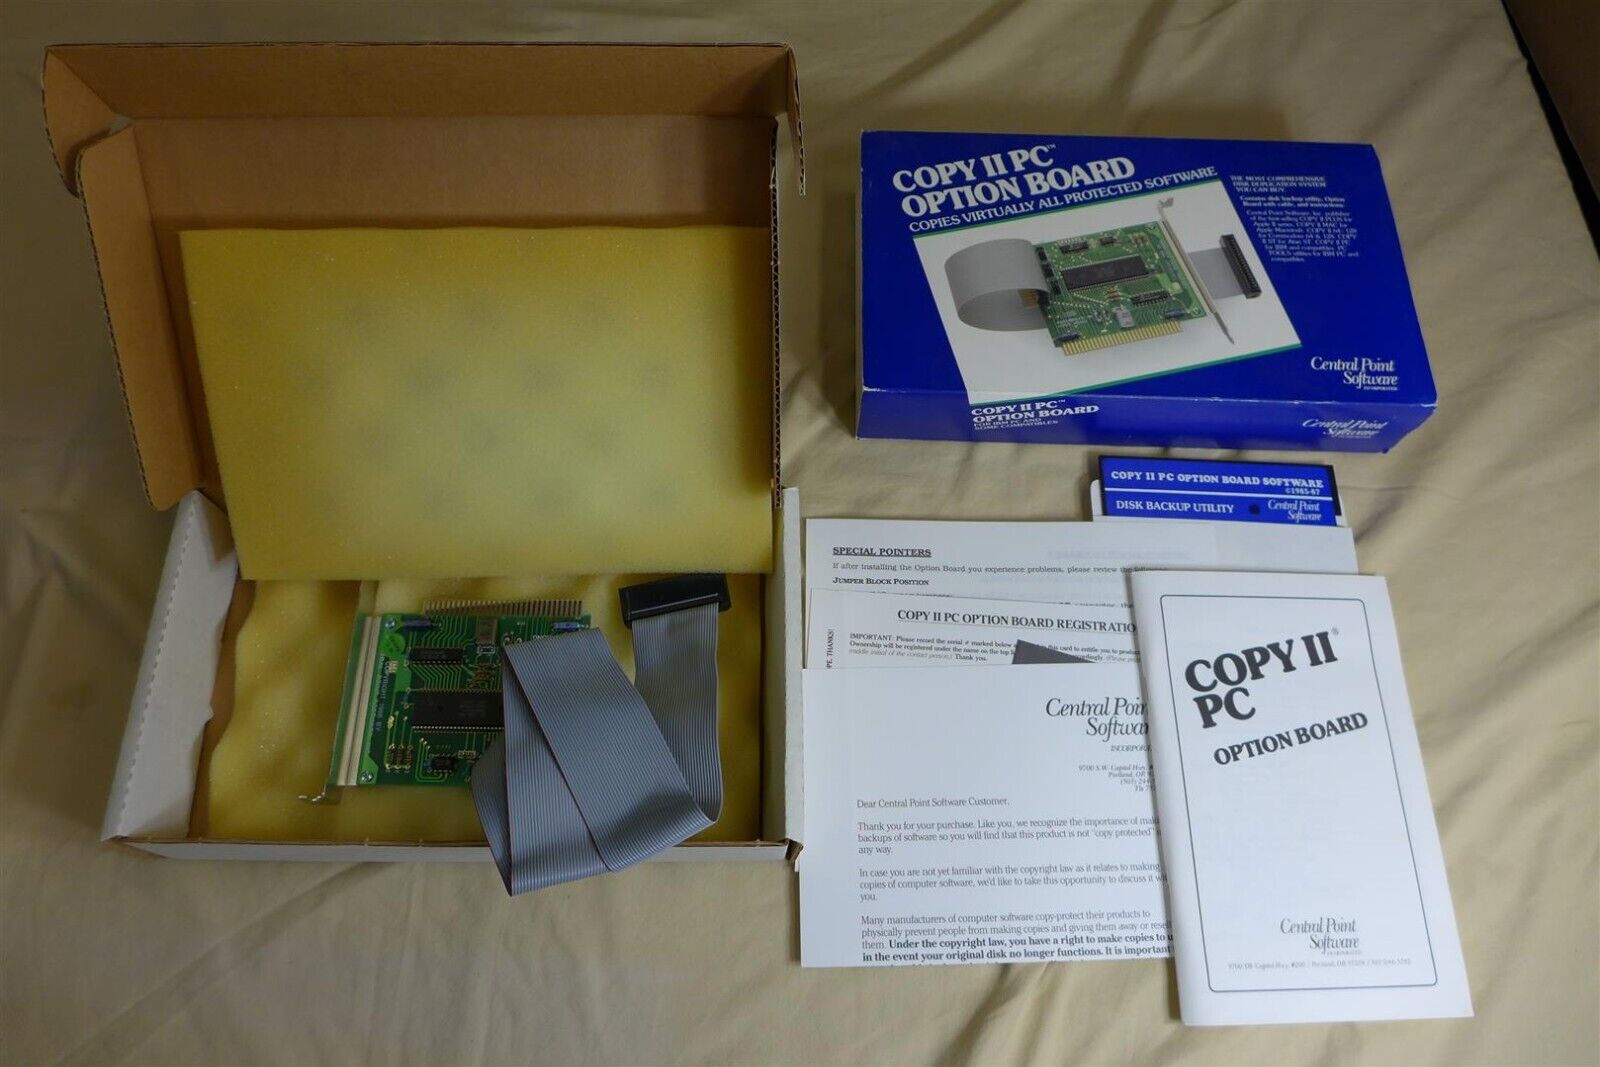 Vintage COPY II PC OPTION BOARD - 1986 Central Point Software - NEW IN BOX